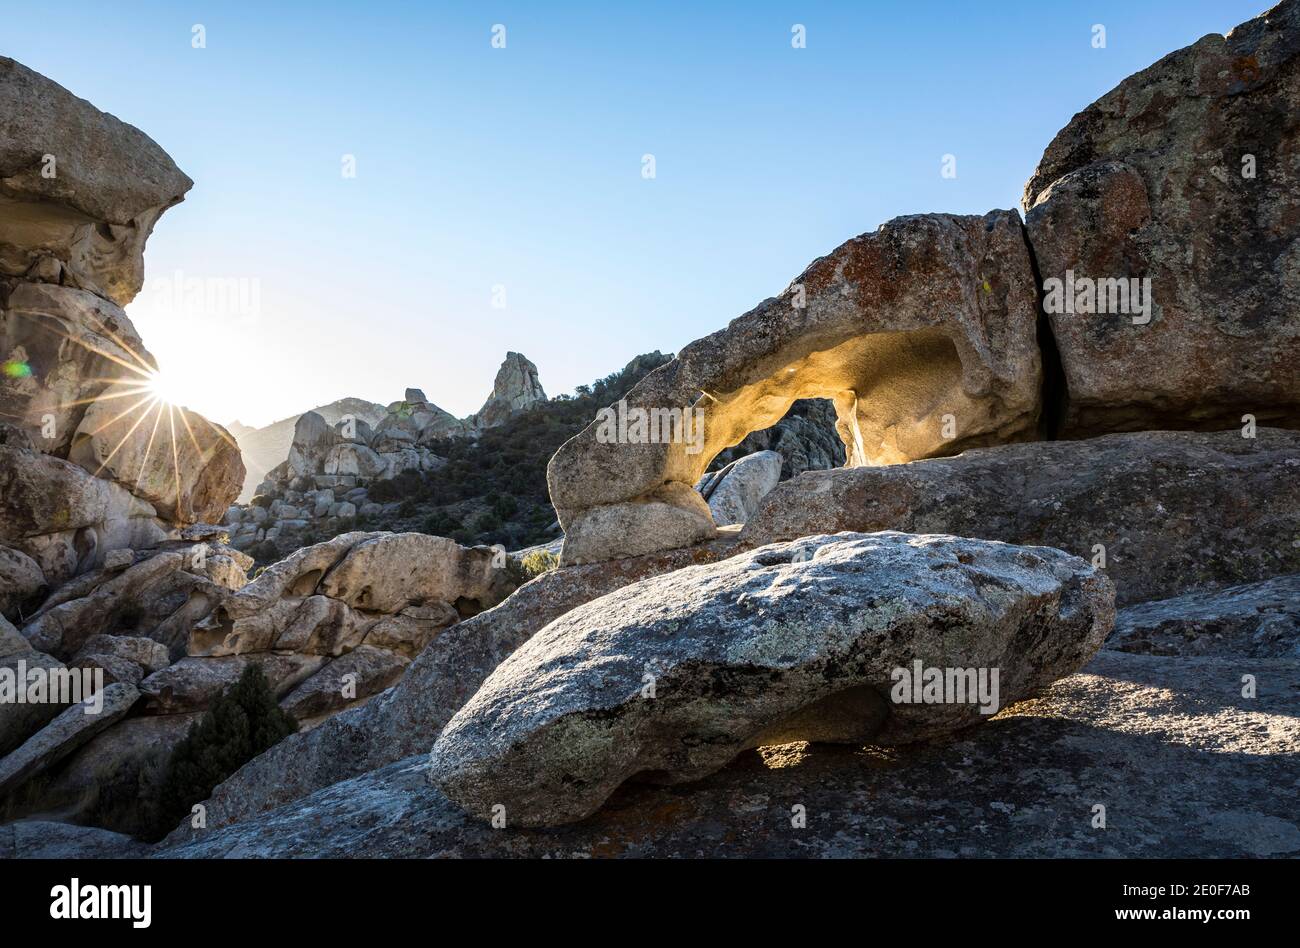 A natural rock archway and rock formations in City of Rocks National Reserve, Idaho, USA. Stock Photo